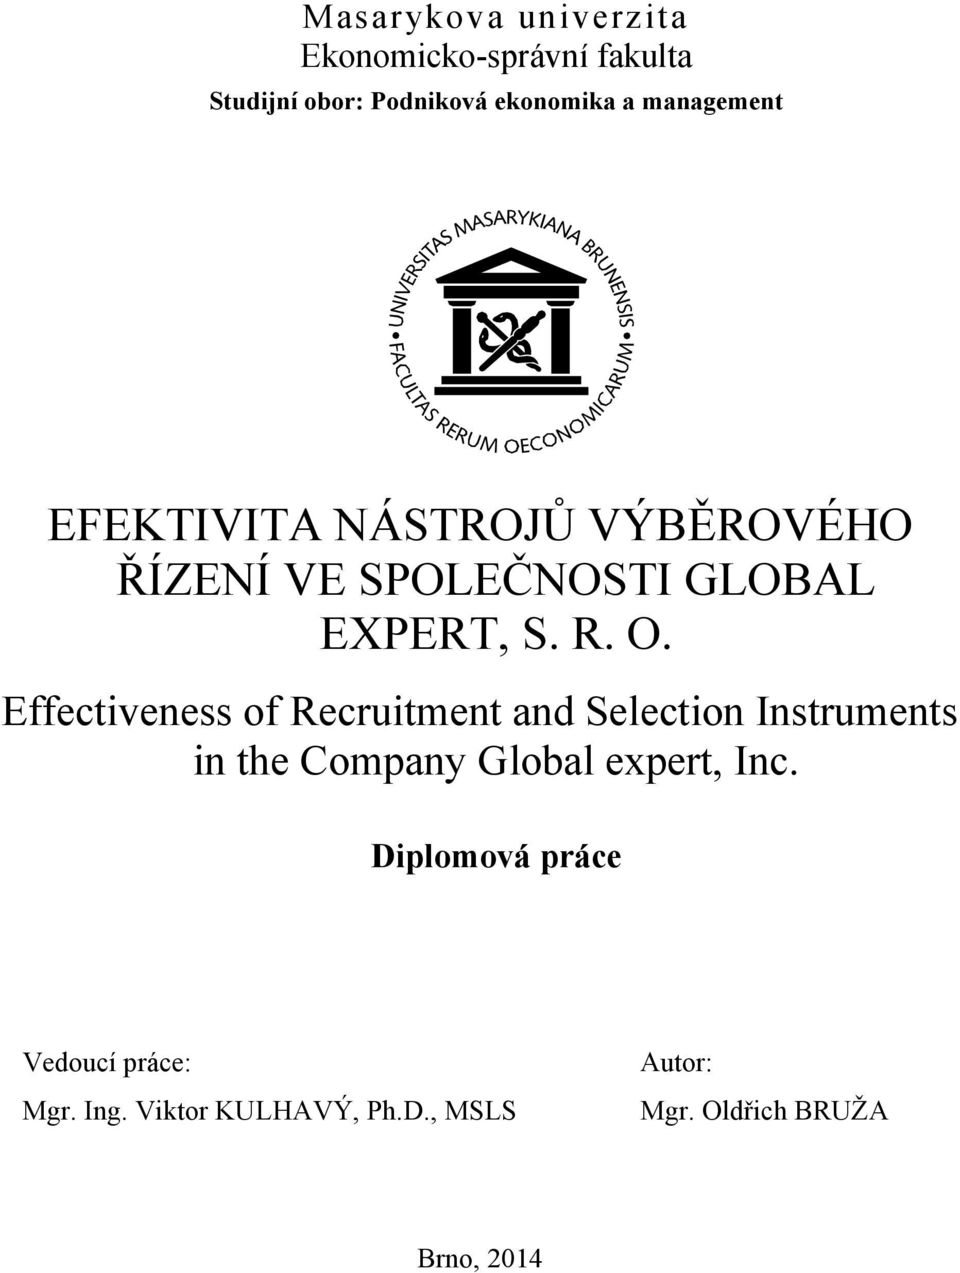 Effectiveness of Recruitment and Selection Instruments in the Company Global expert, Inc.